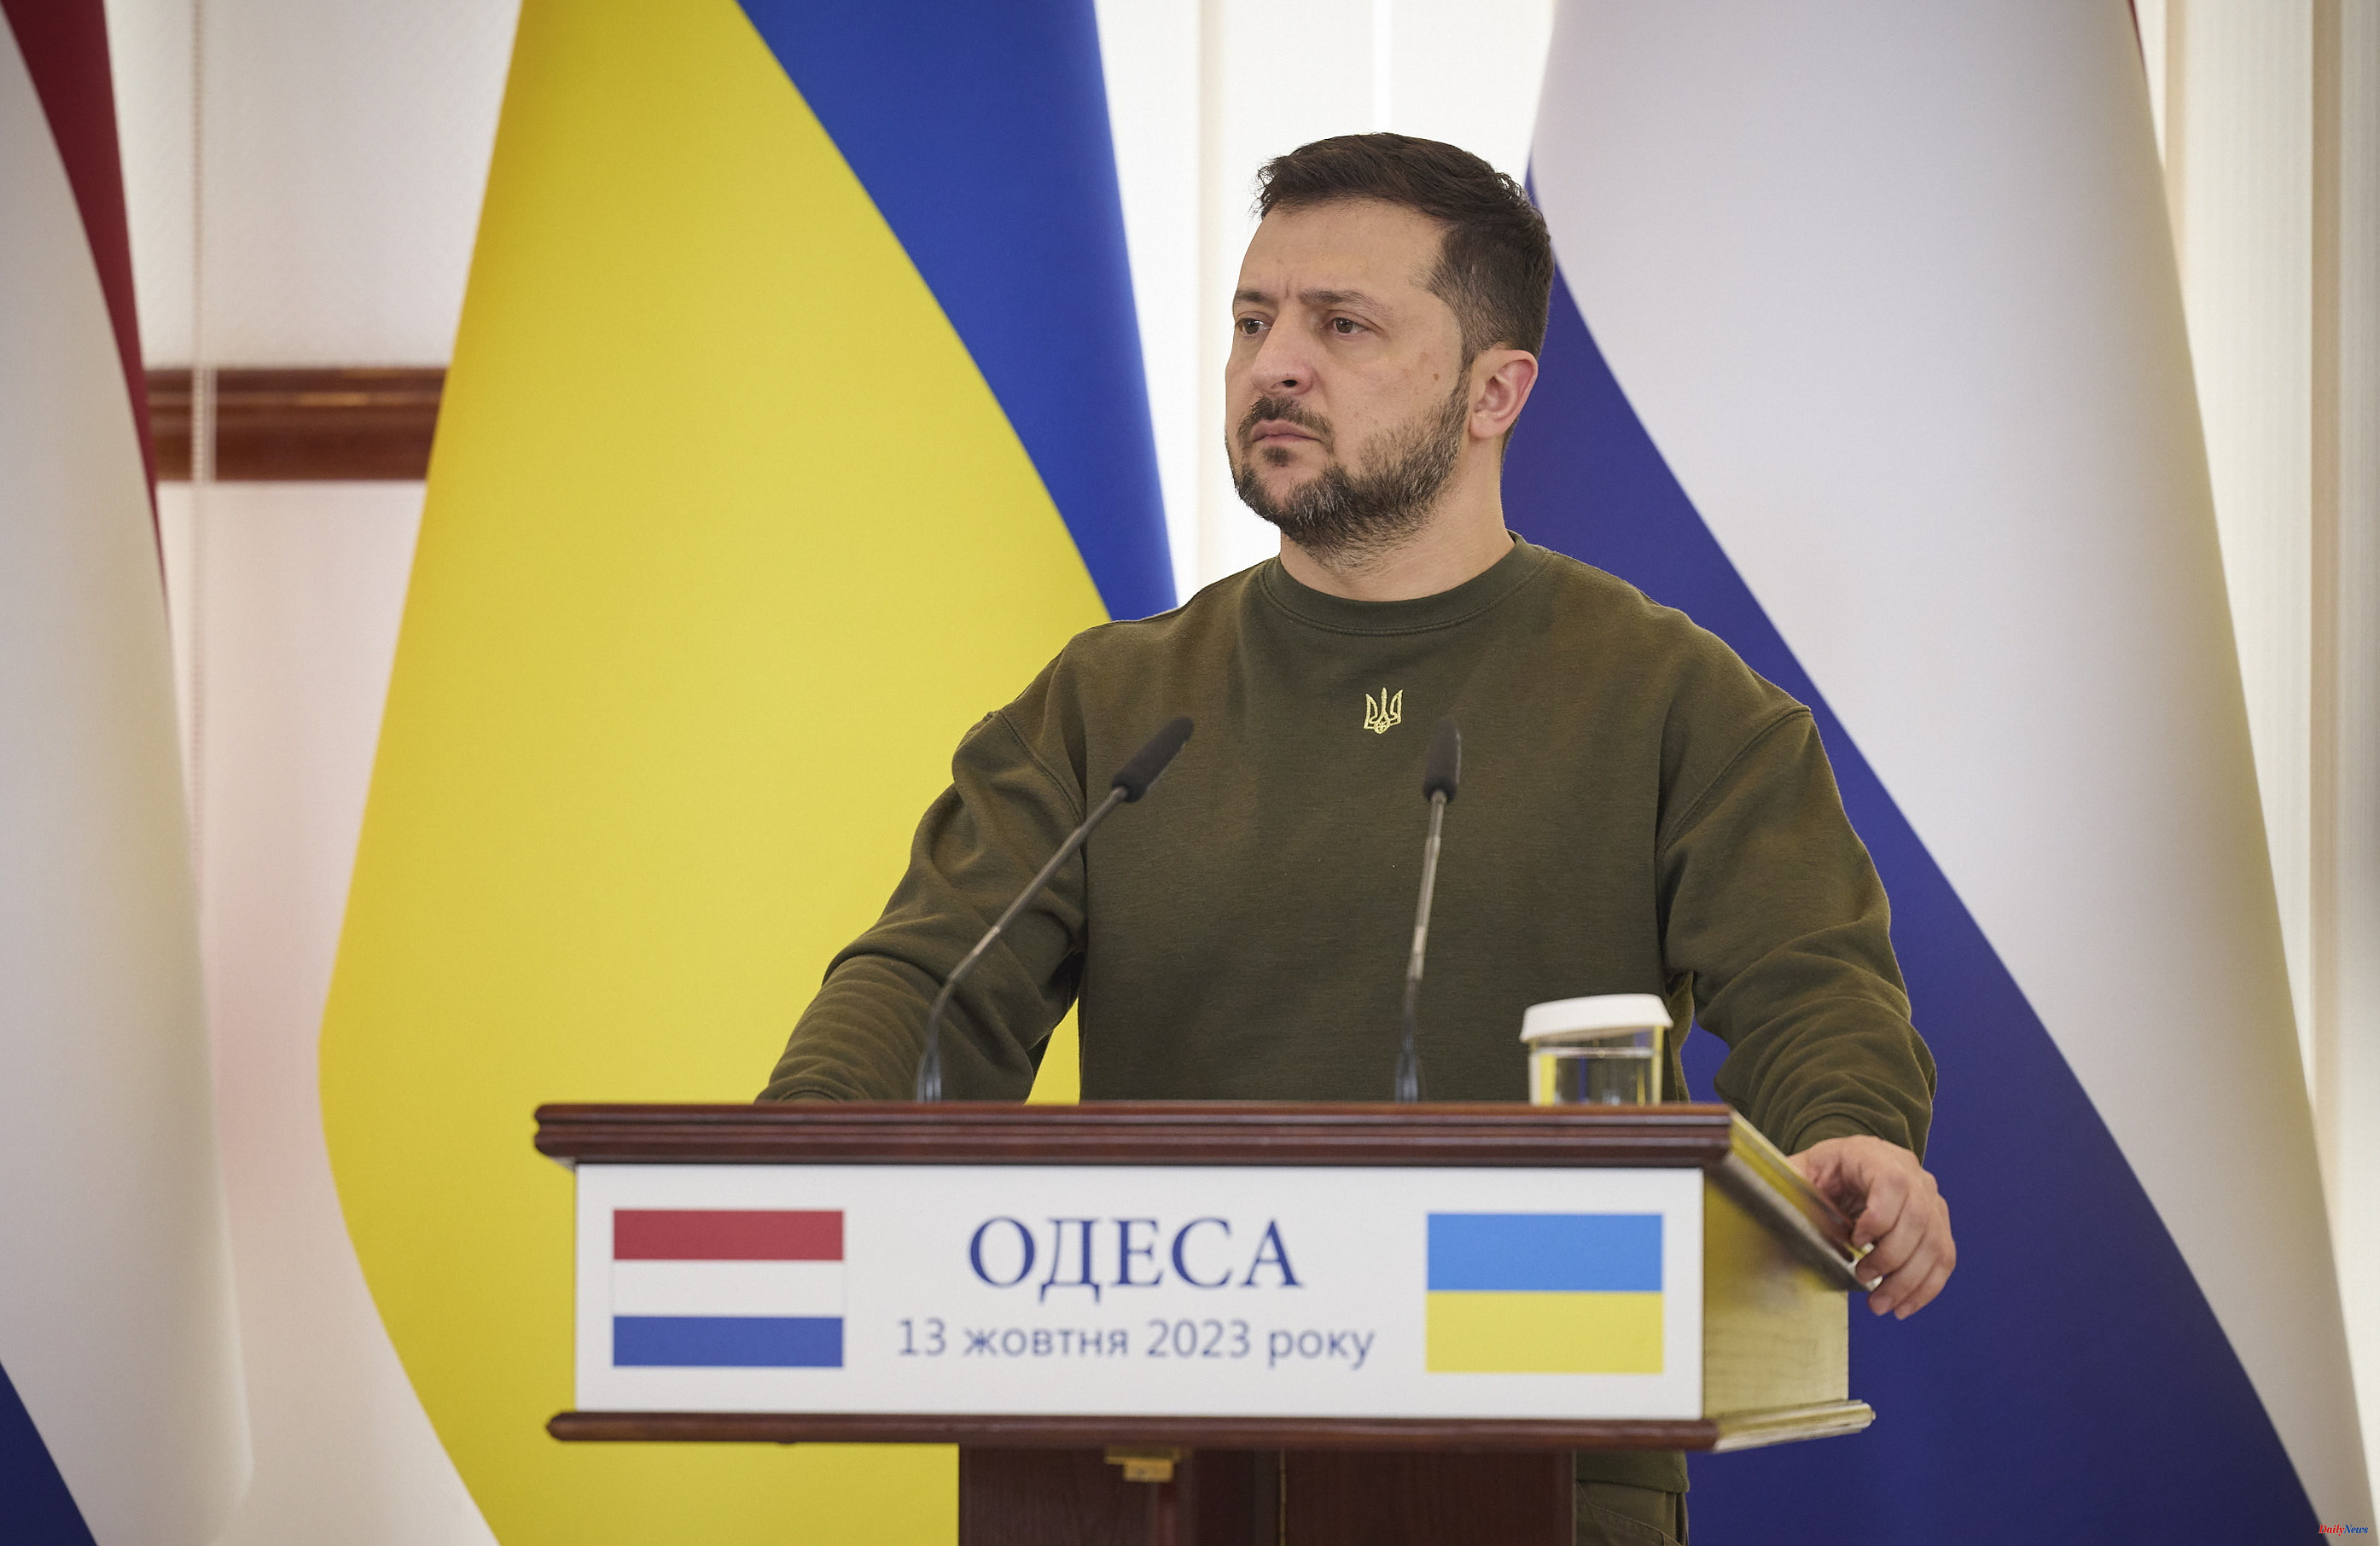 War in Ukraine Zelensky assures that the "successes" of Ukraine's counteroffensive in the Black Sea reduce Russian influence in the Middle East